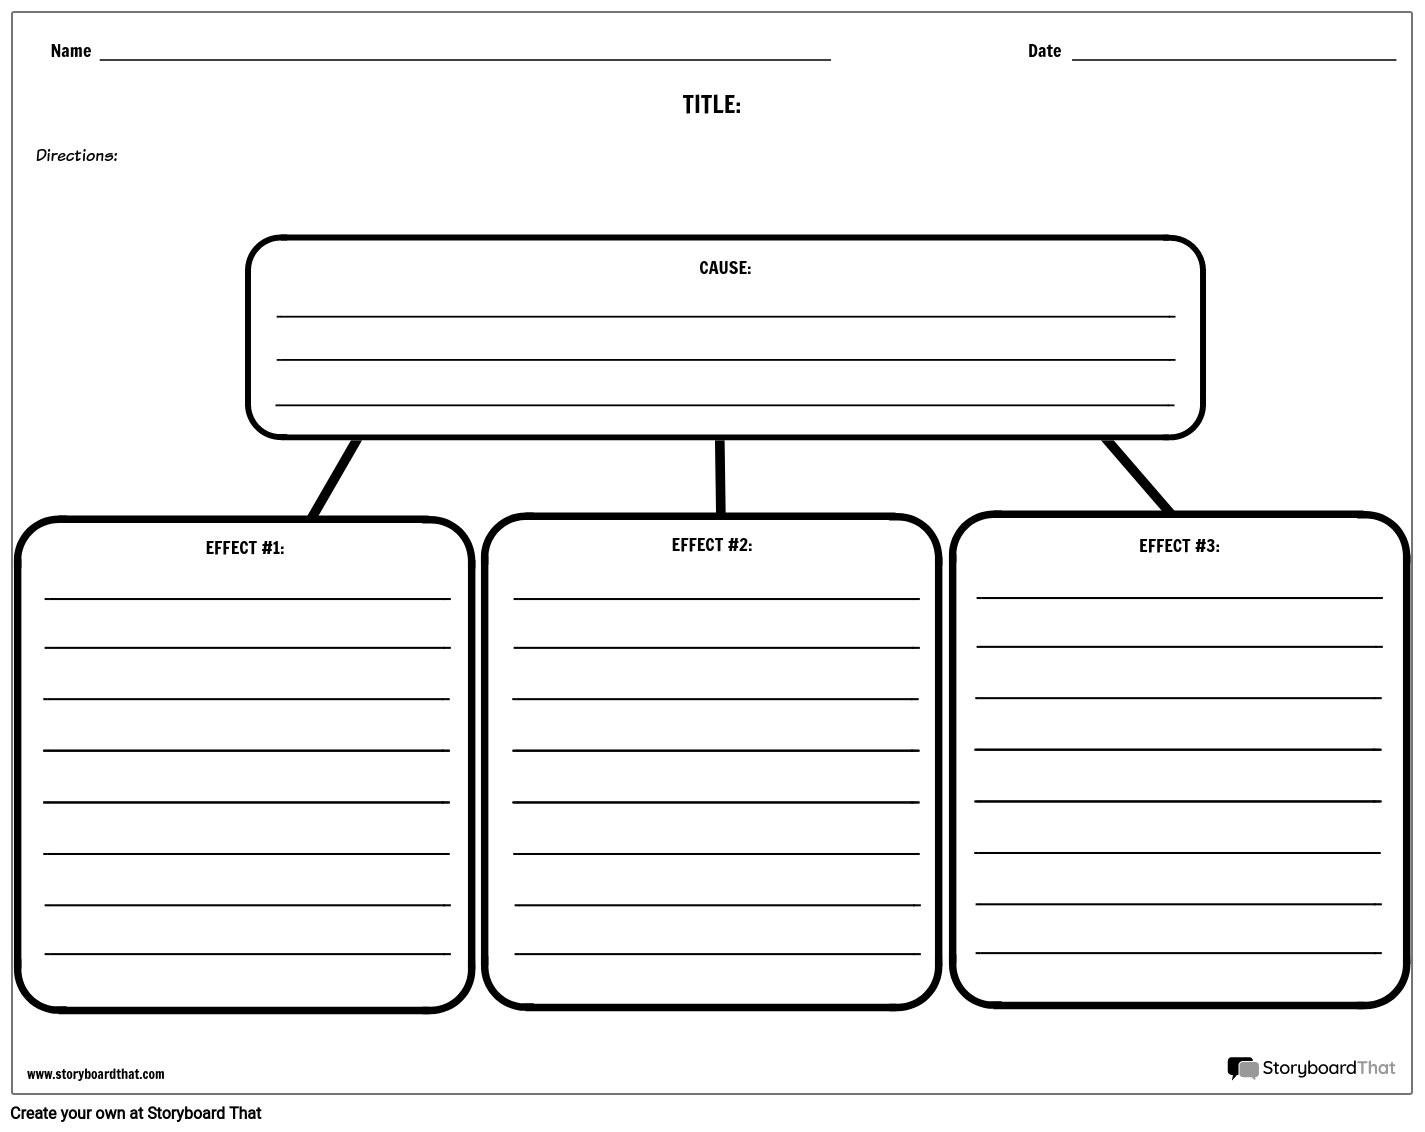 Simple Text Box Based Cause and Effect Worksheet